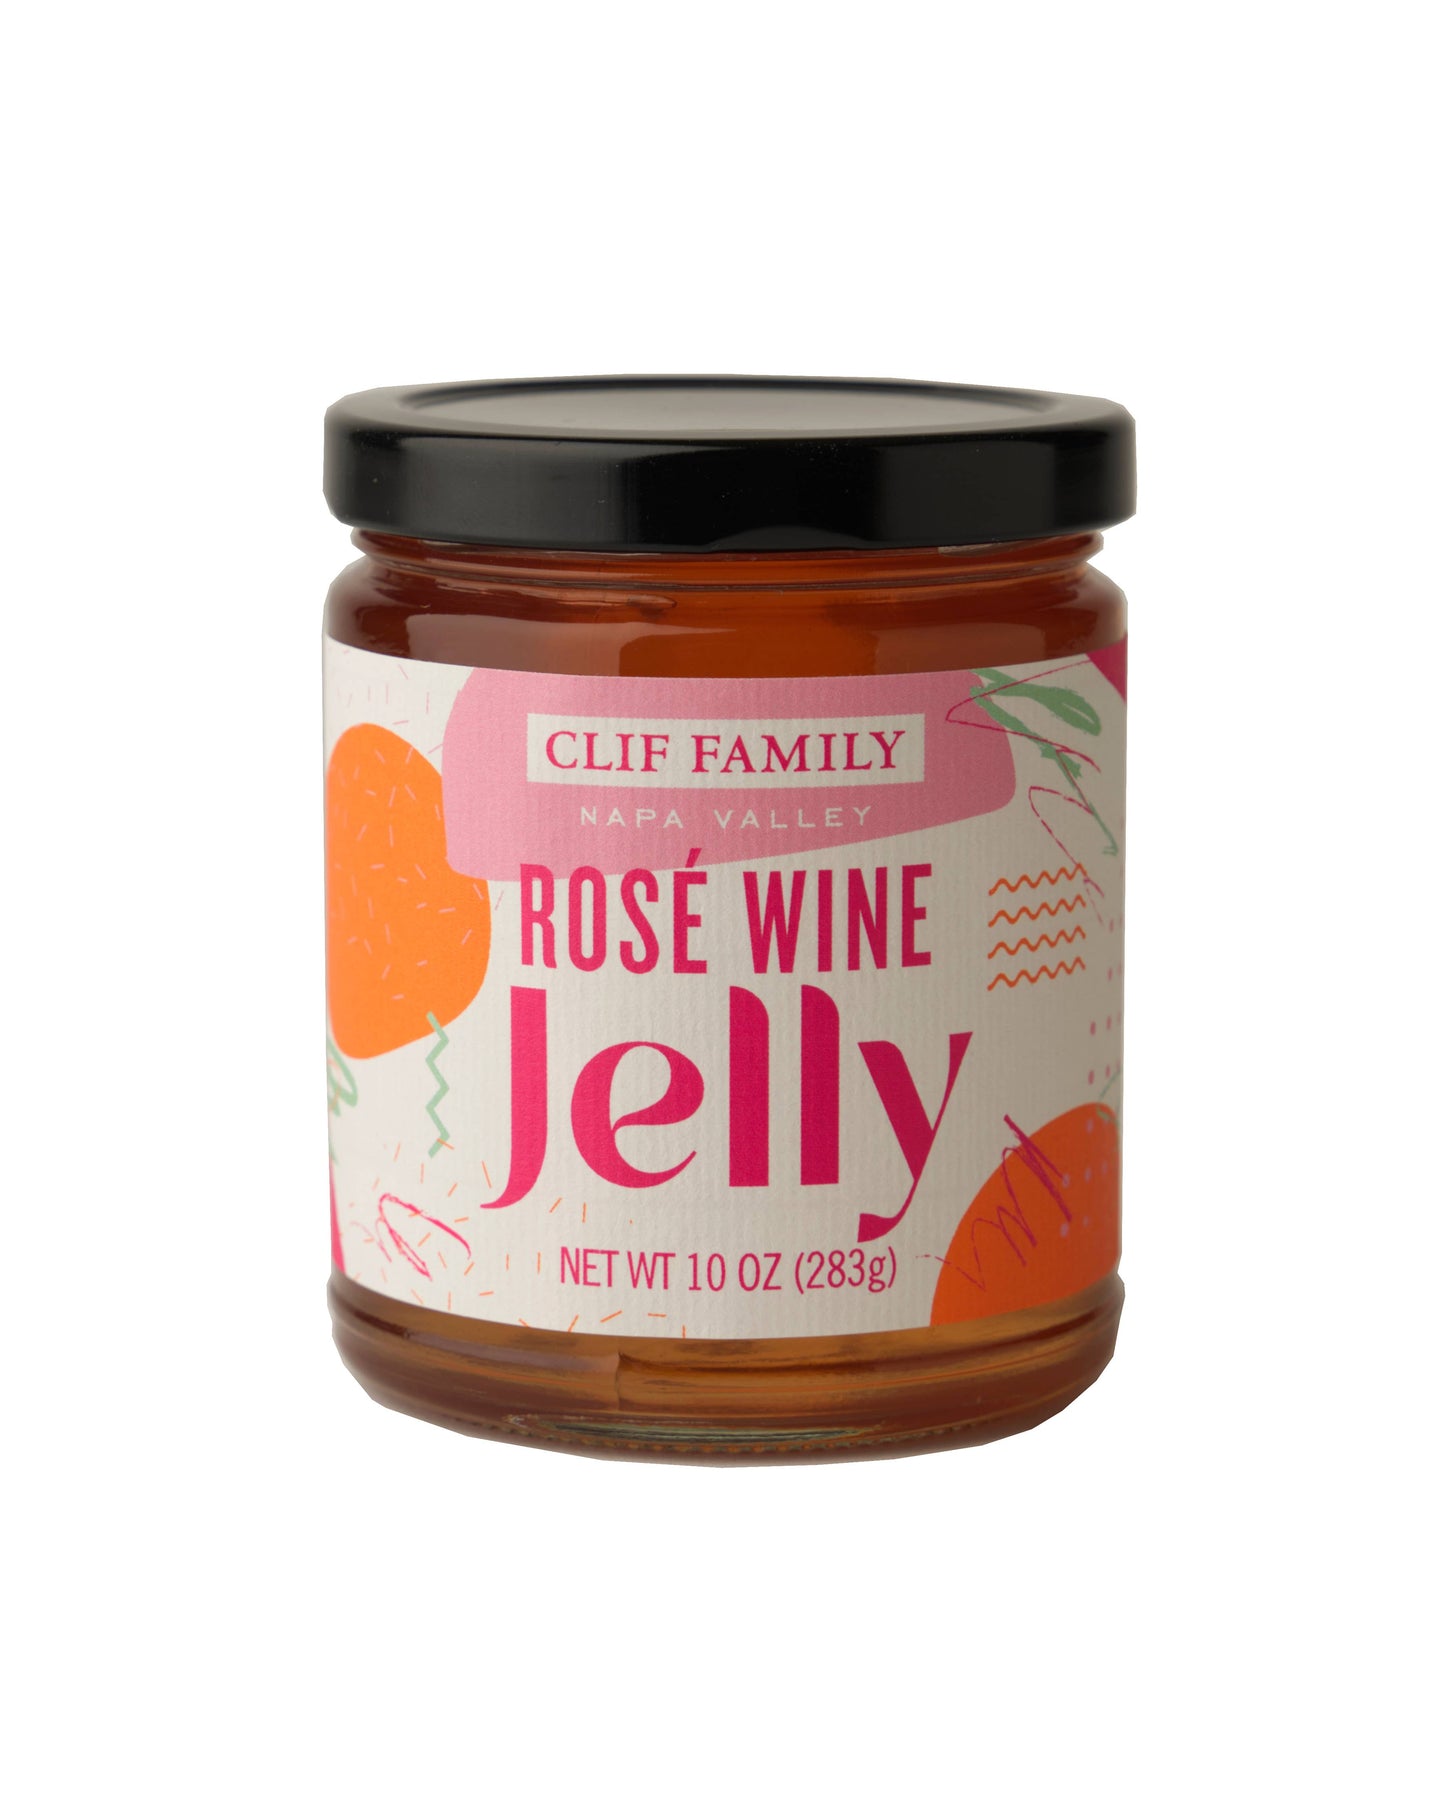 Clif Family Napa Valley Wine Jelly  Clif Family Napa Valley, Certified B Corp Company Rose Wine Jelly  -better made easy-eco-friendly-sustainable-gifting